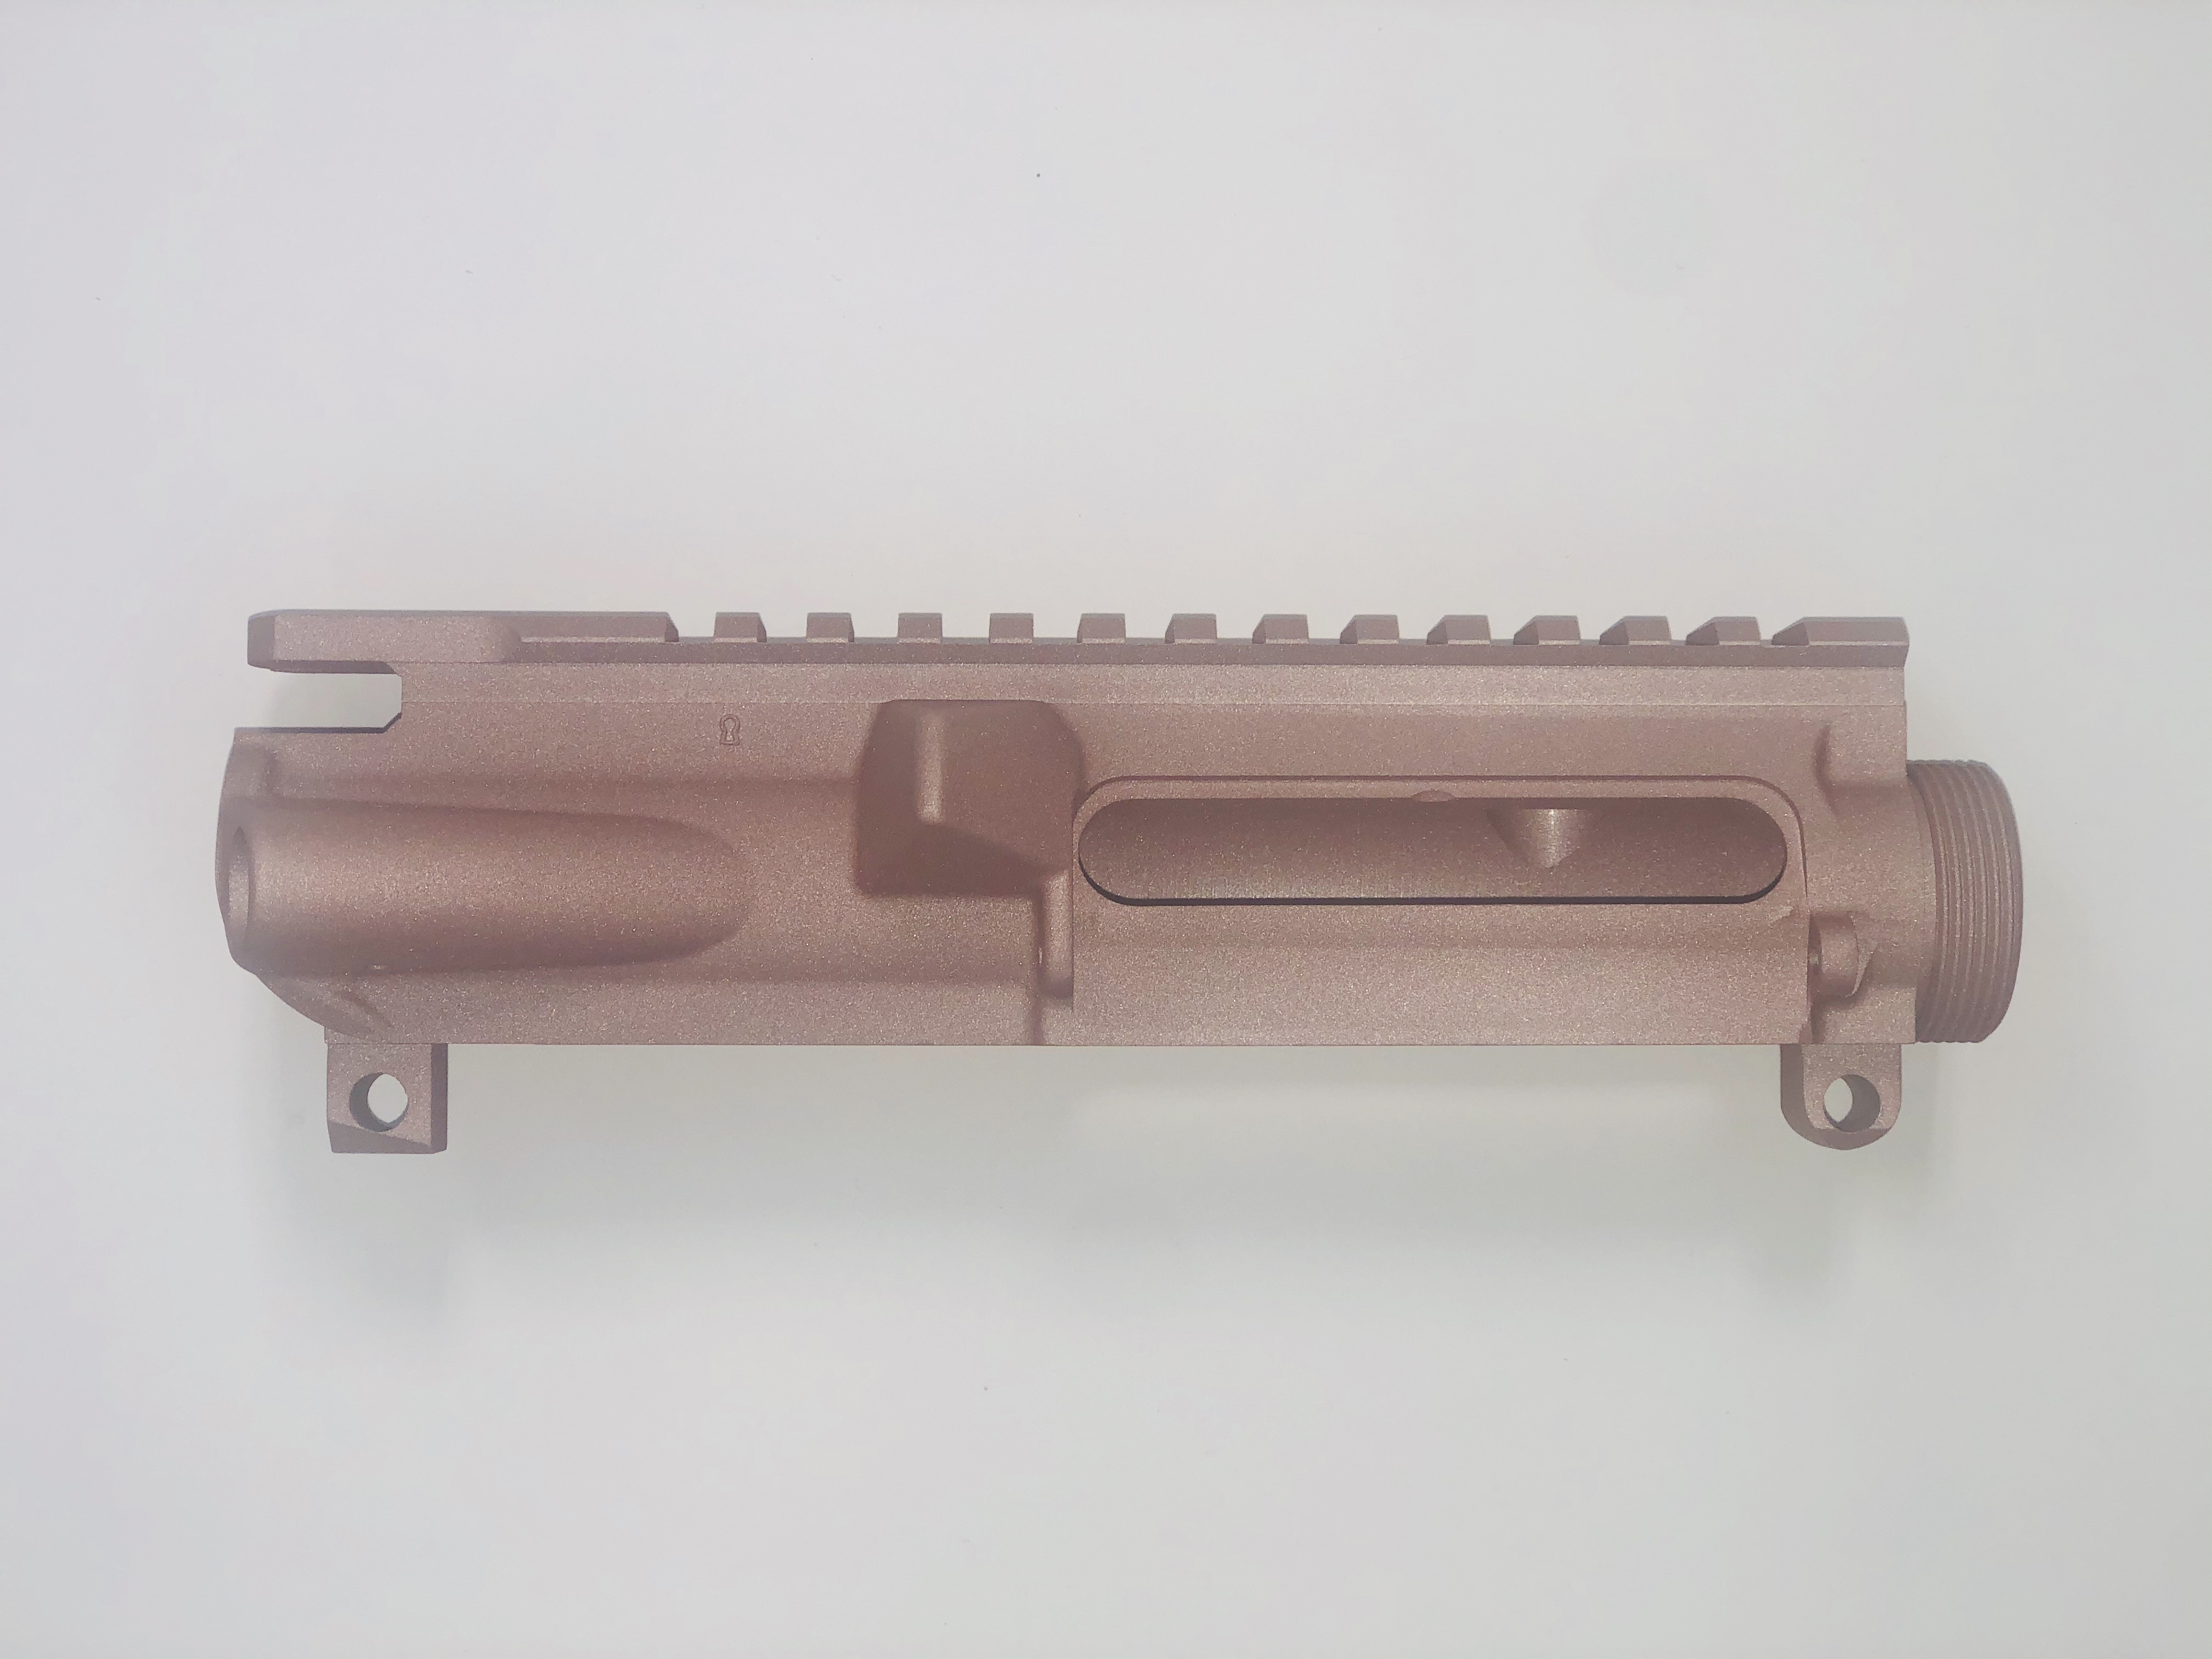 AR-15 Forged Cerakoted Rose Gold Upper Receiver GeauxArmory | LECOMPTE